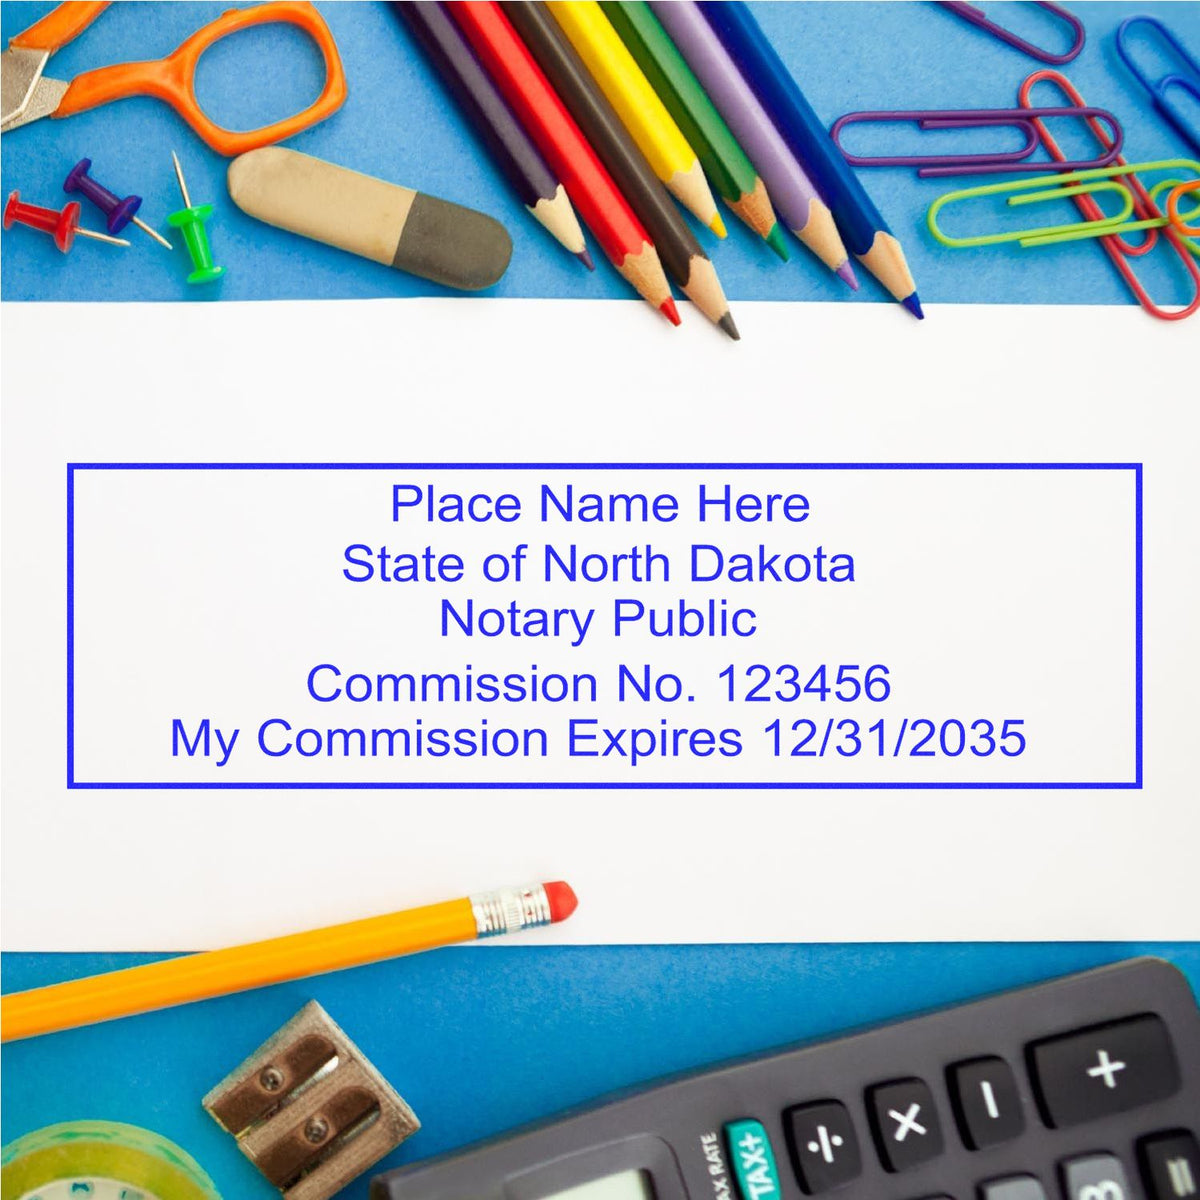 This paper is stamped with a sample imprint of the Wooden Handle North Dakota Rectangular Notary Public Stamp, signifying its quality and reliability.